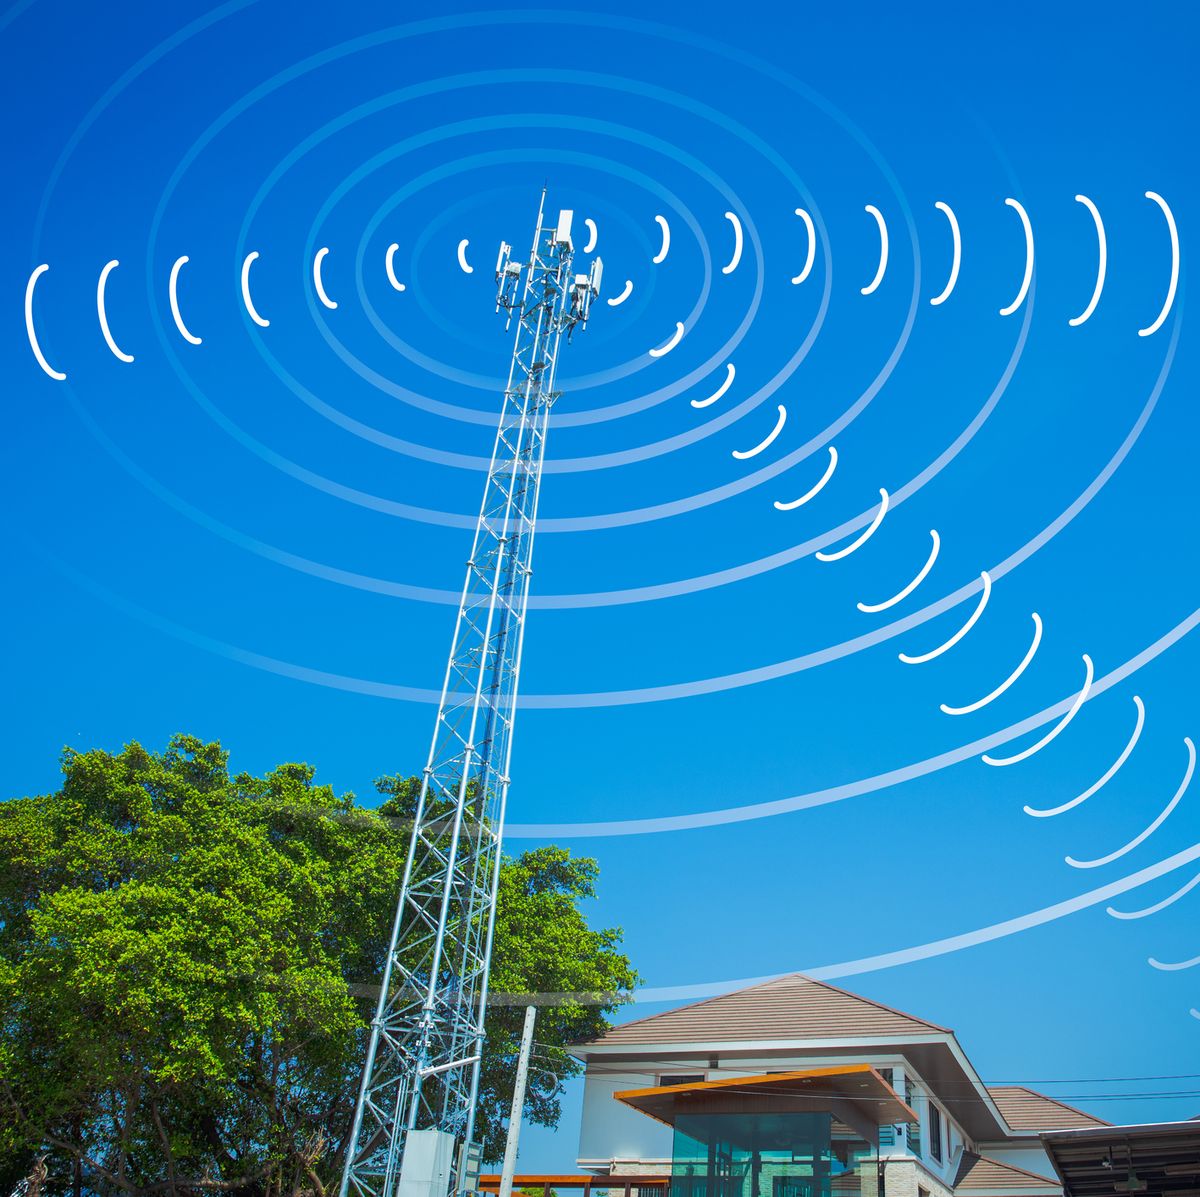 communication tower send and receive radio wave signal in the city concept.